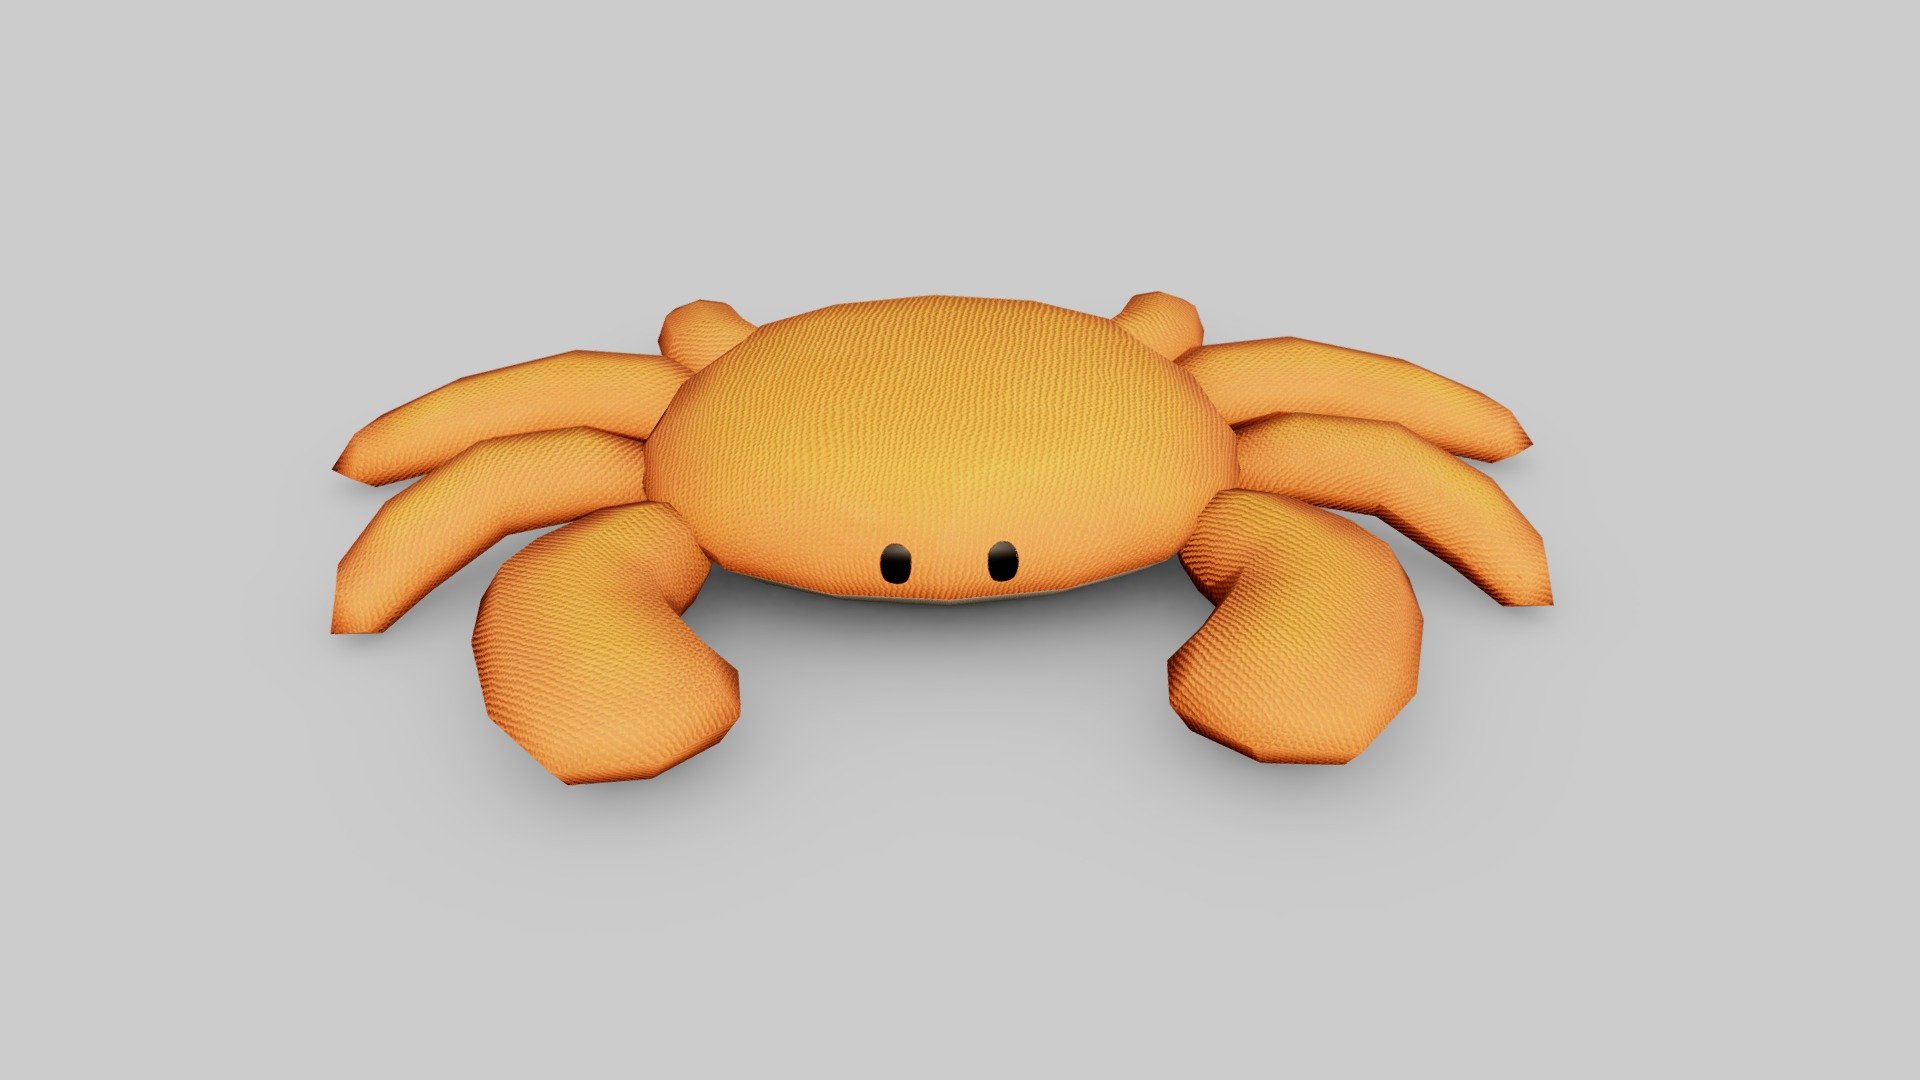 Crab plush toy for your renders and games

Textures:

Diffuse color, Roughness, Normal, AO

All textures are 2K

Files Formats:

Blend

Fbx

Obj - Crab Plush Toy - Buy Royalty Free 3D model by Vanessa Araújo (@vanessa3d) 3d model